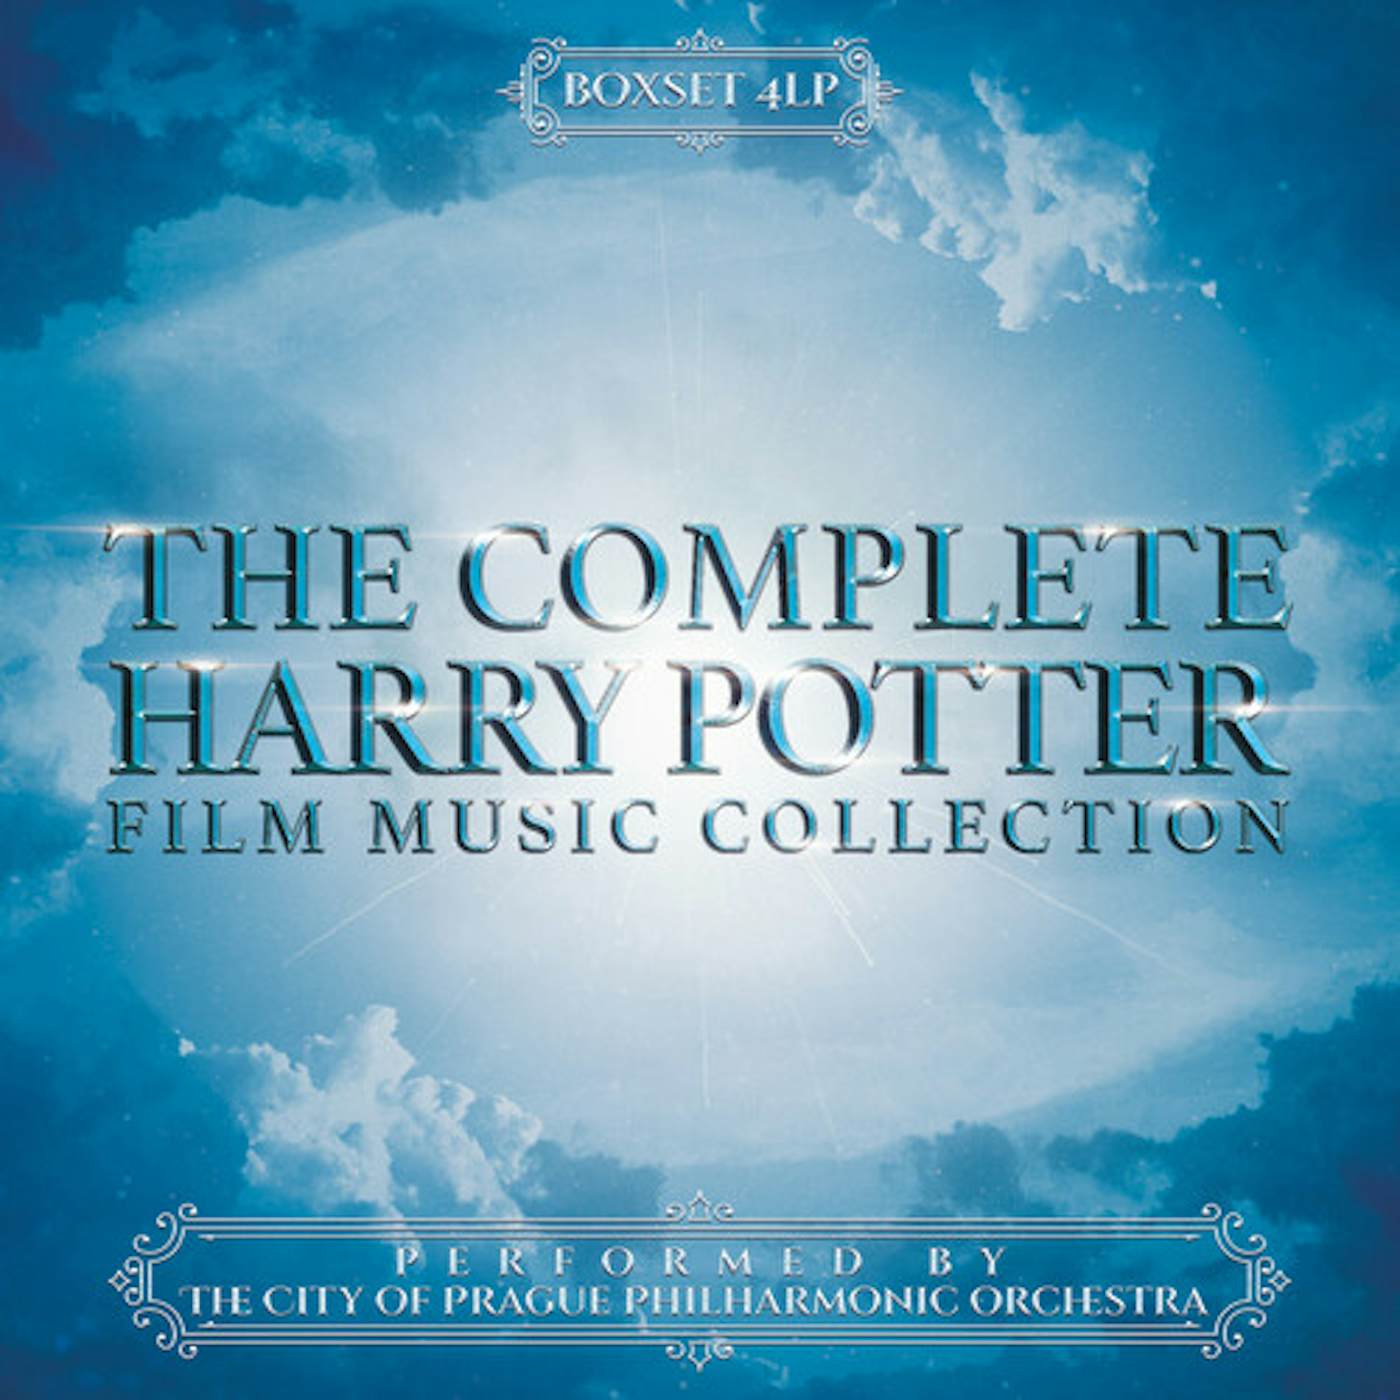 The City of Prague Philharmonic Orchestra COMPLETE HARRY POTTER FILM MUSIC COLLECTION Vinyl Record